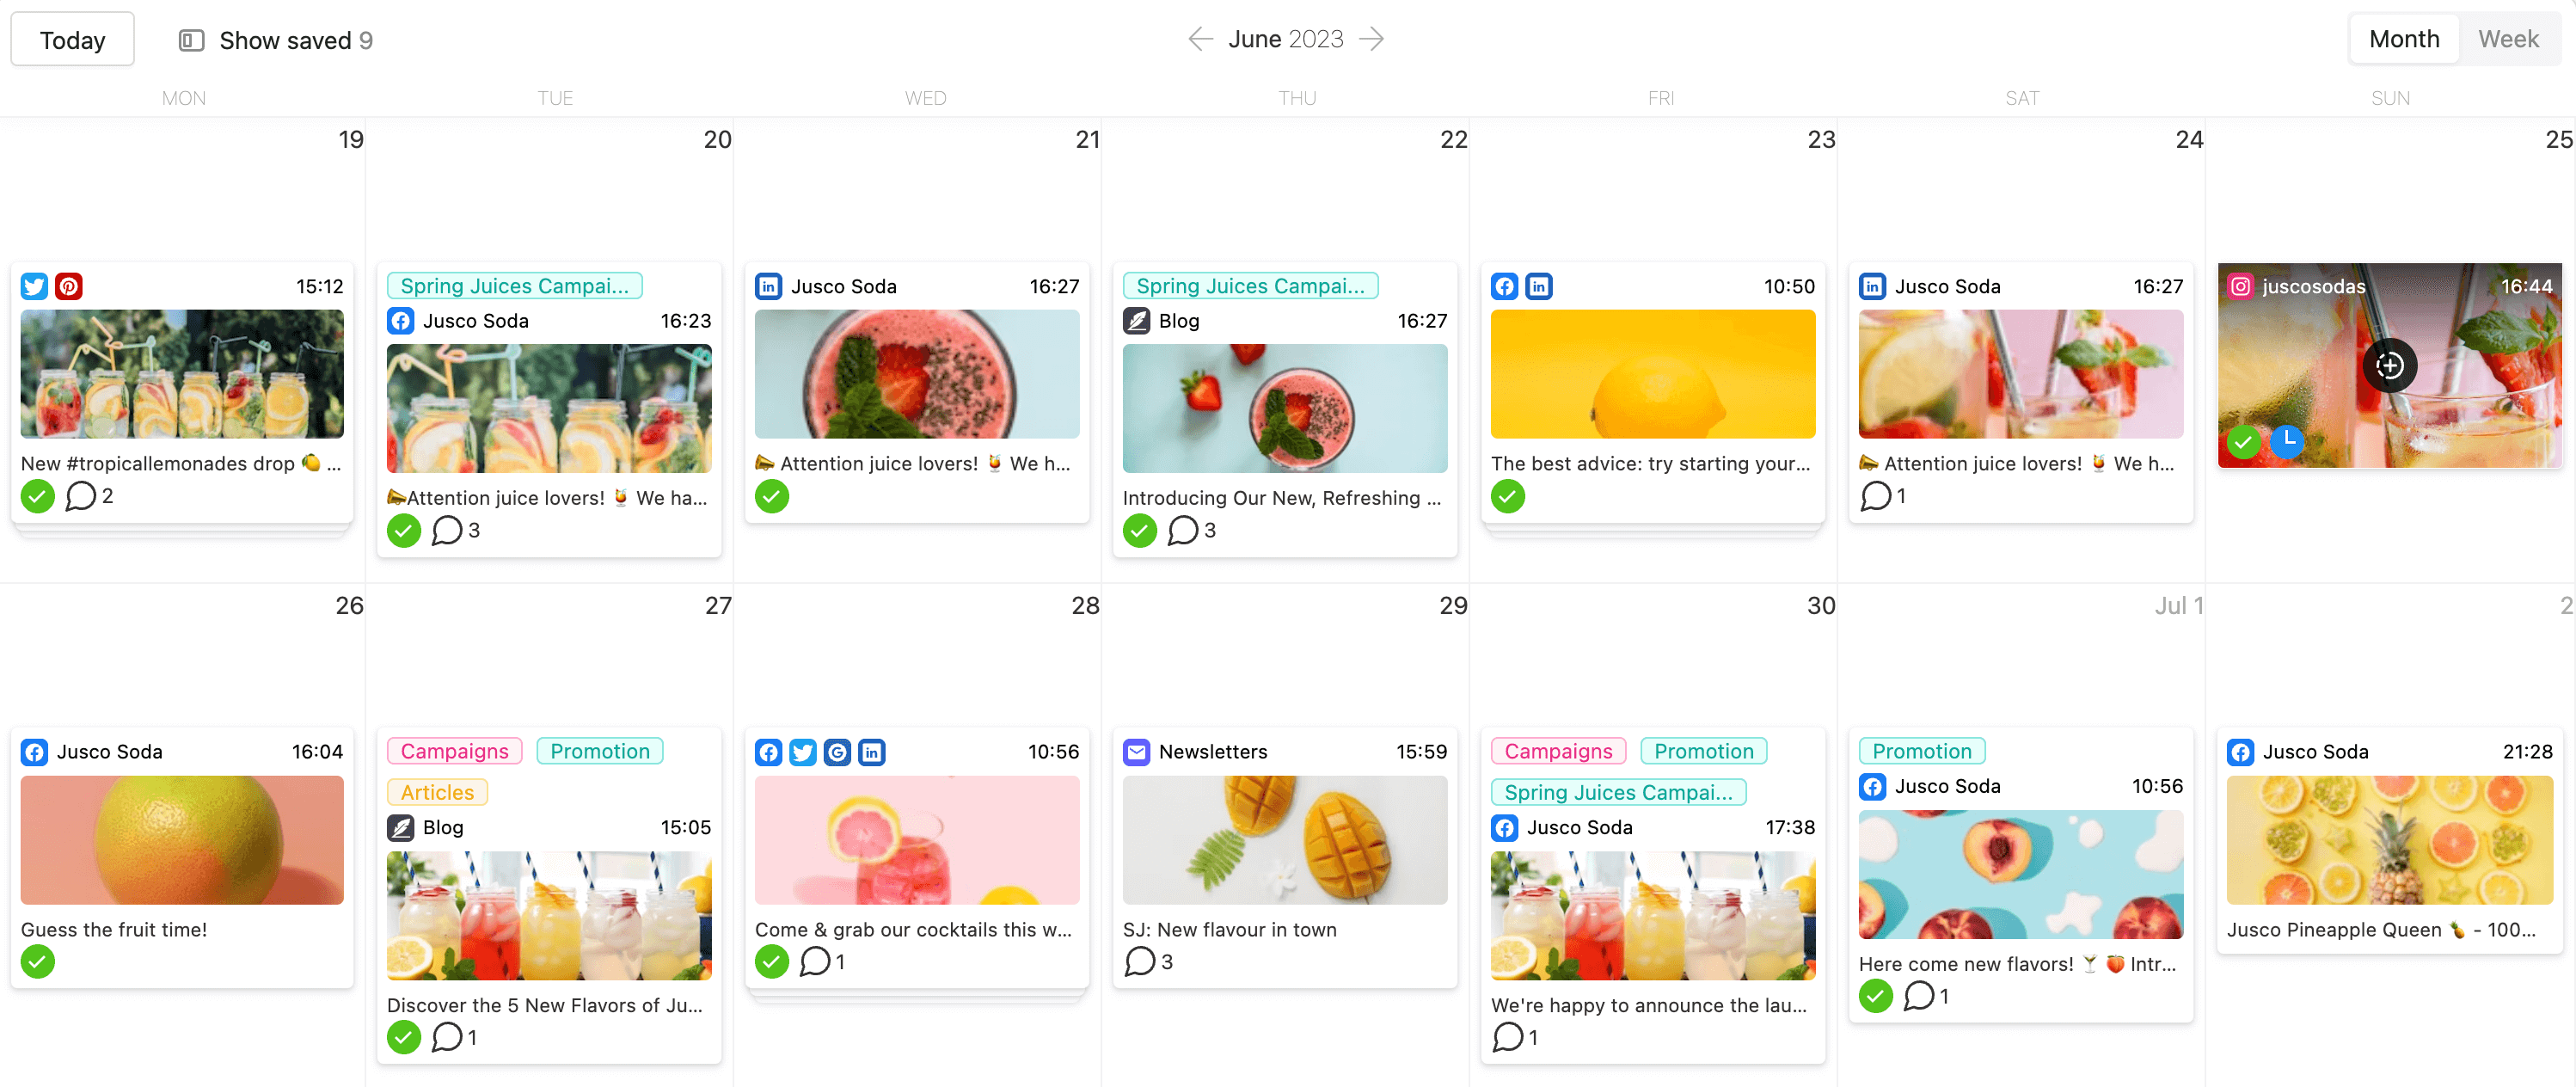 Content calendar with social posts, blogs and newsletters and collaboration icons like comments count and green approval checks.